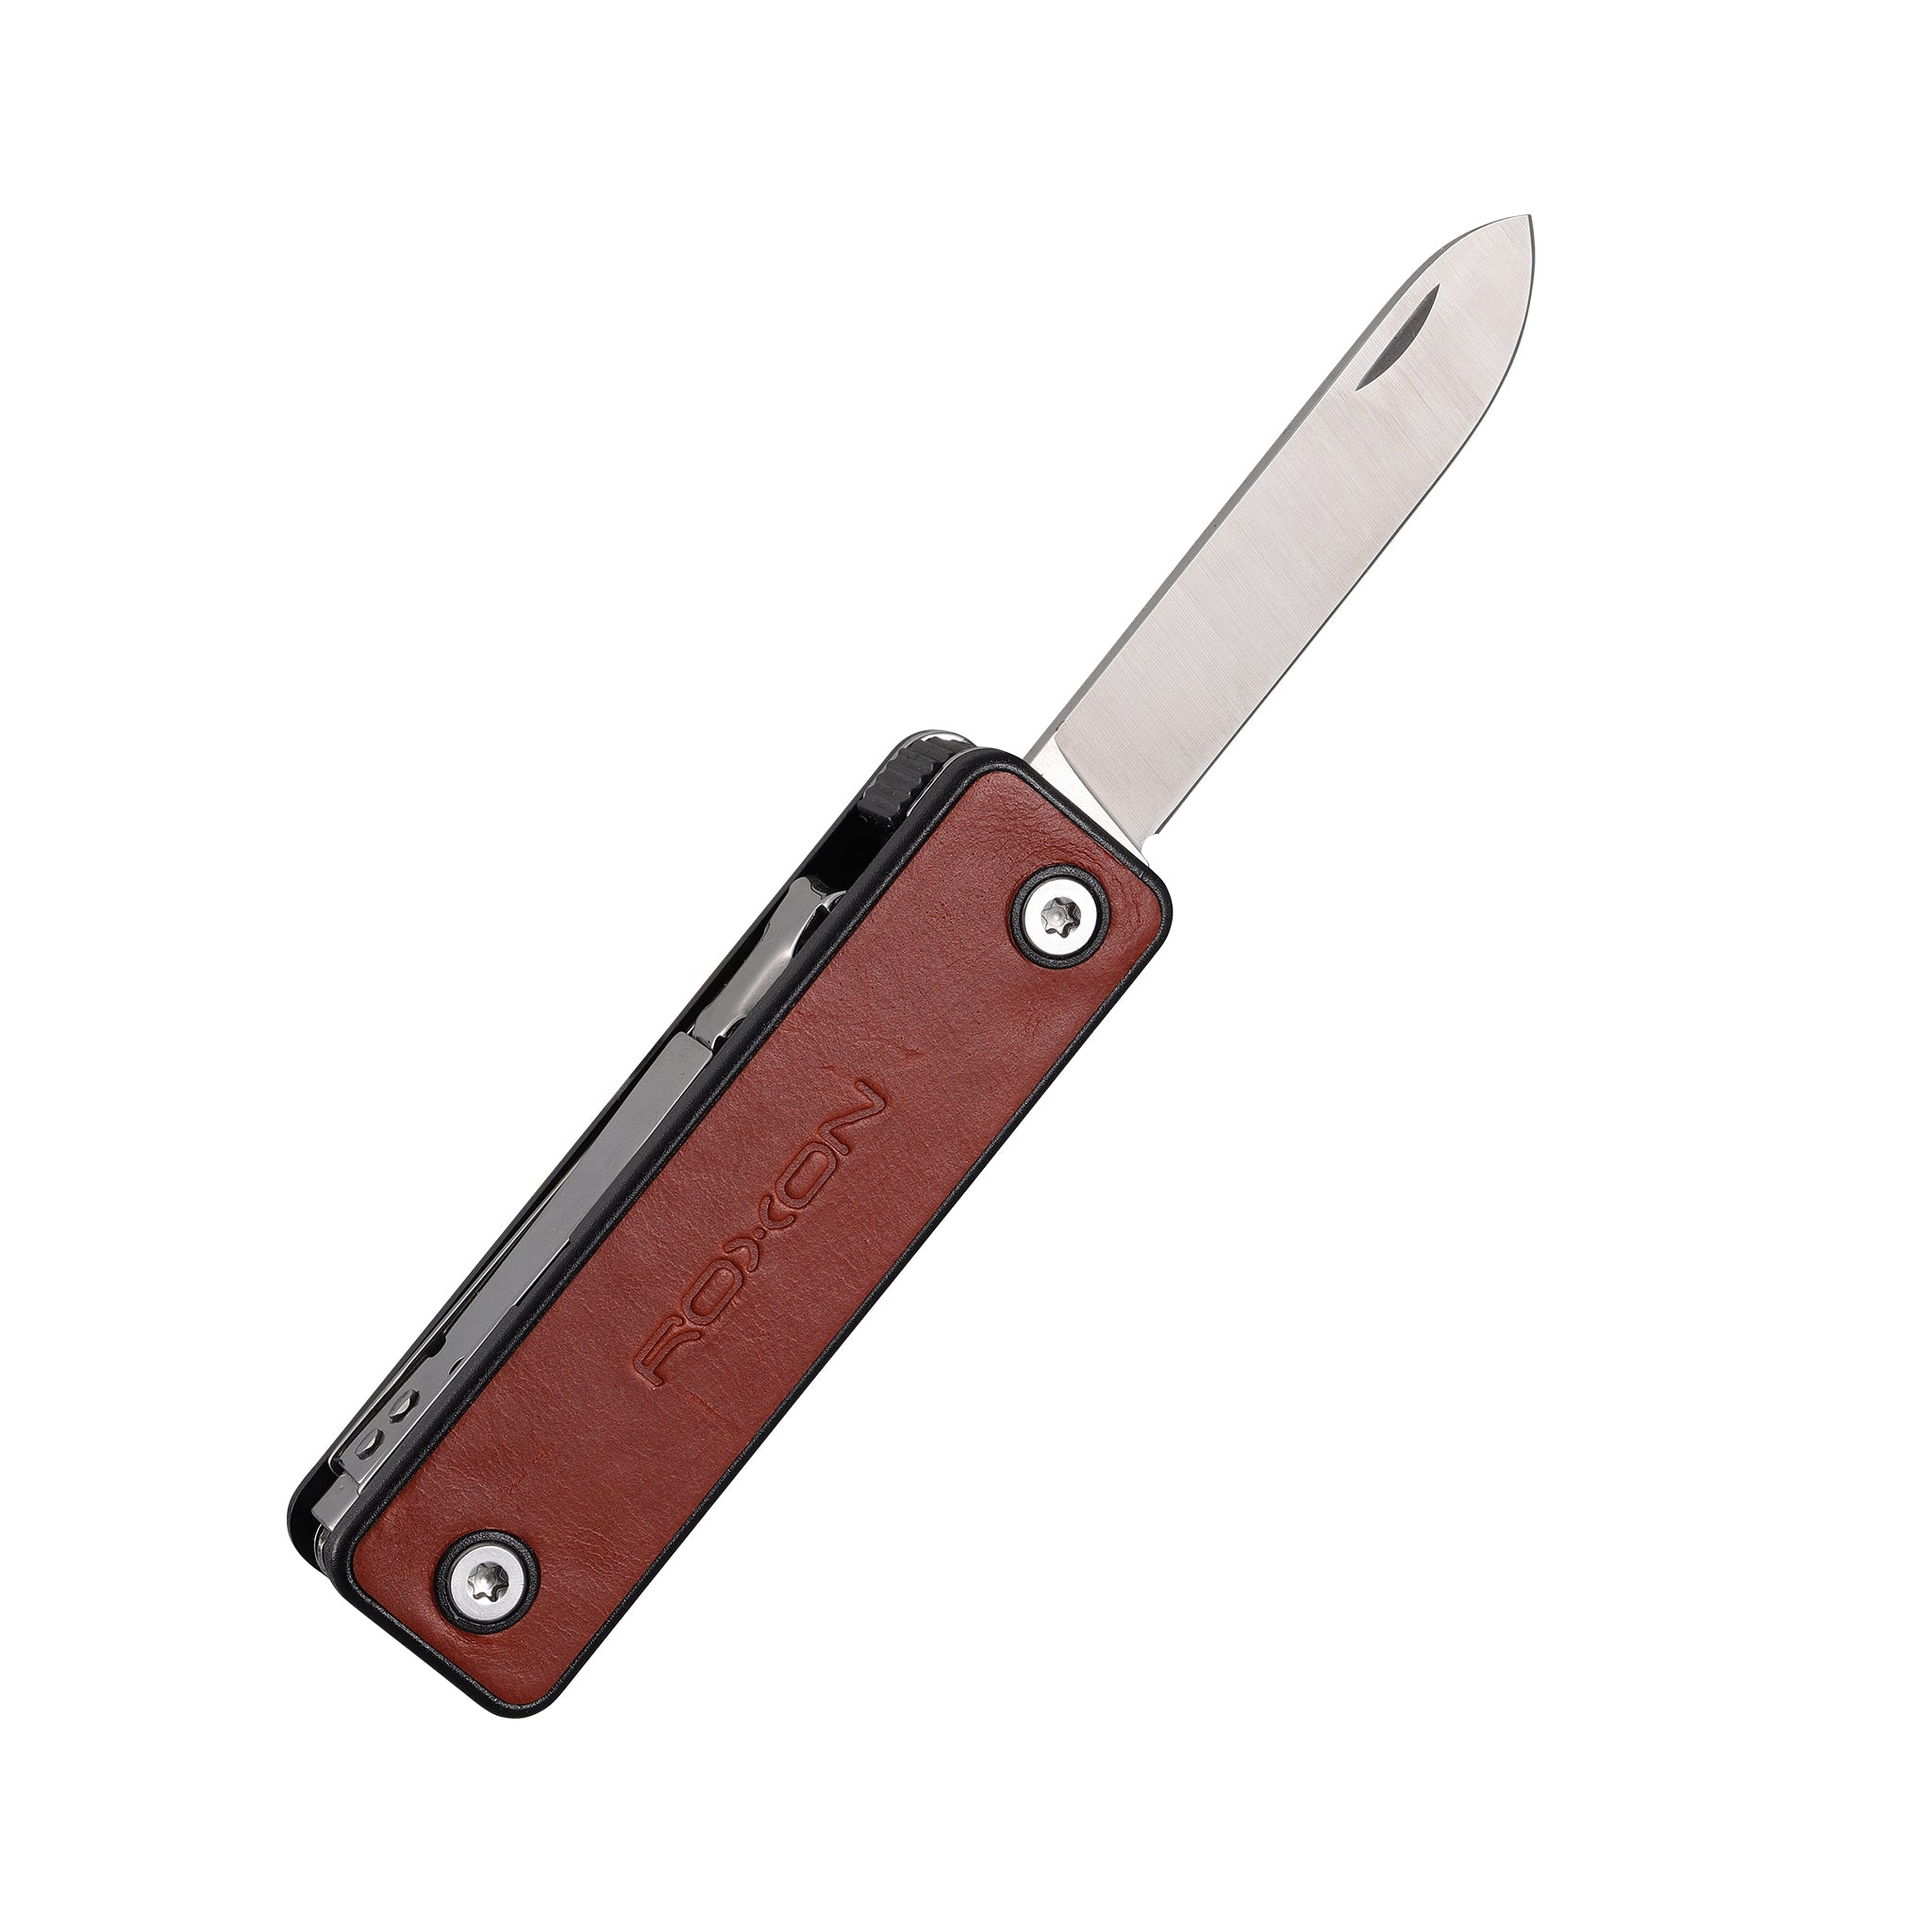 ROXON KS2 13 in 1 Multi Tool function pocket knife with big scissor, G10  handle and Pocket clip, good for Camping/Backpacking/Emergencies/EDC  (5cr15Mov Blade) 